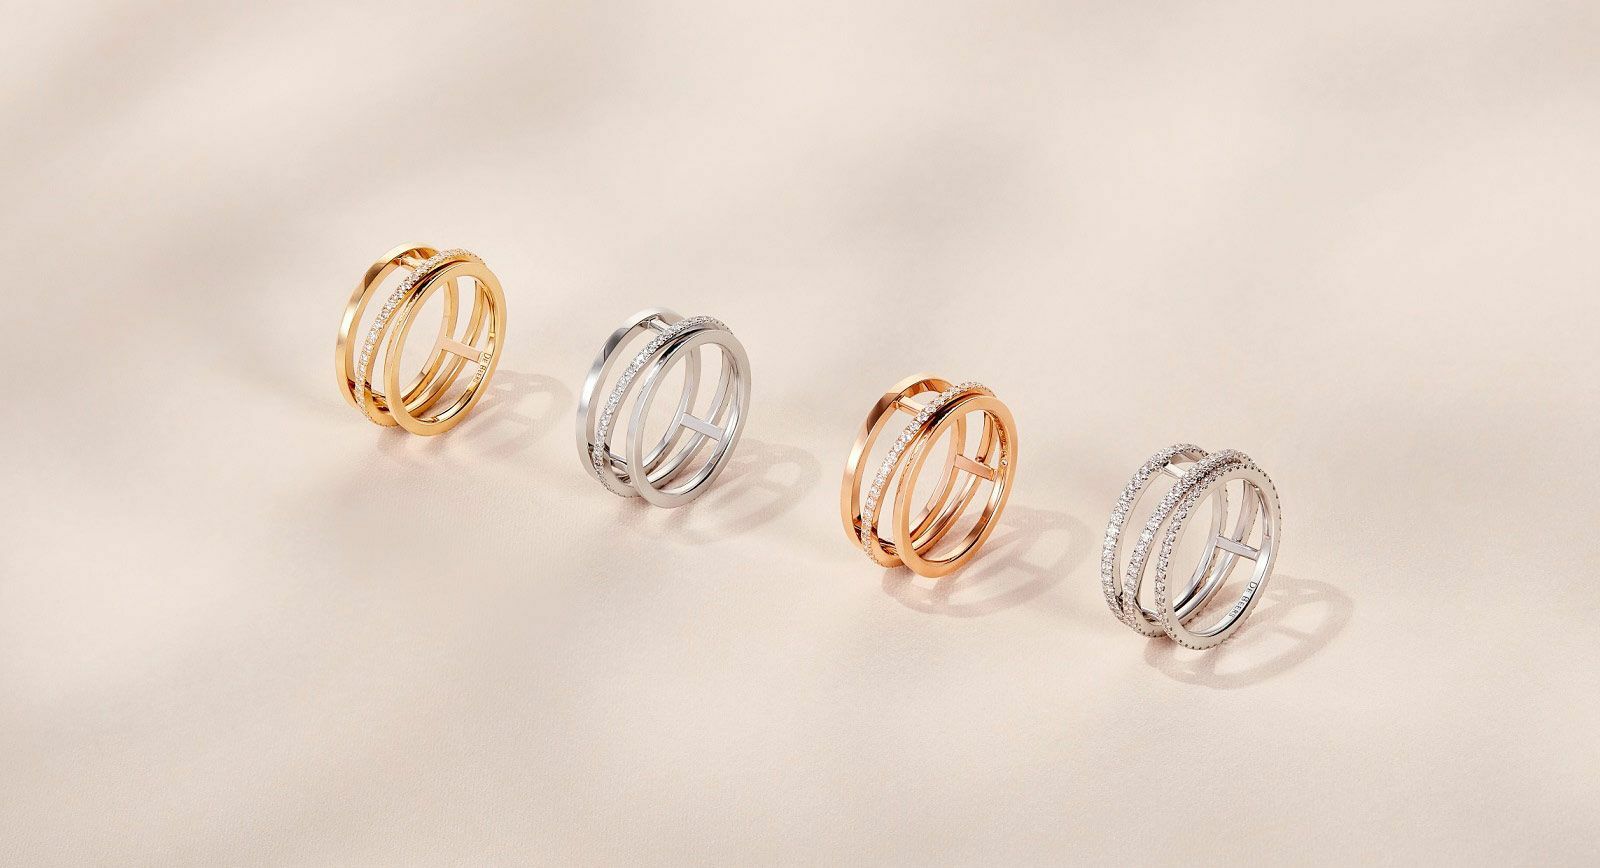 De Beers’ new ‘Horizon’ collection rings in while, yellow and rose gold